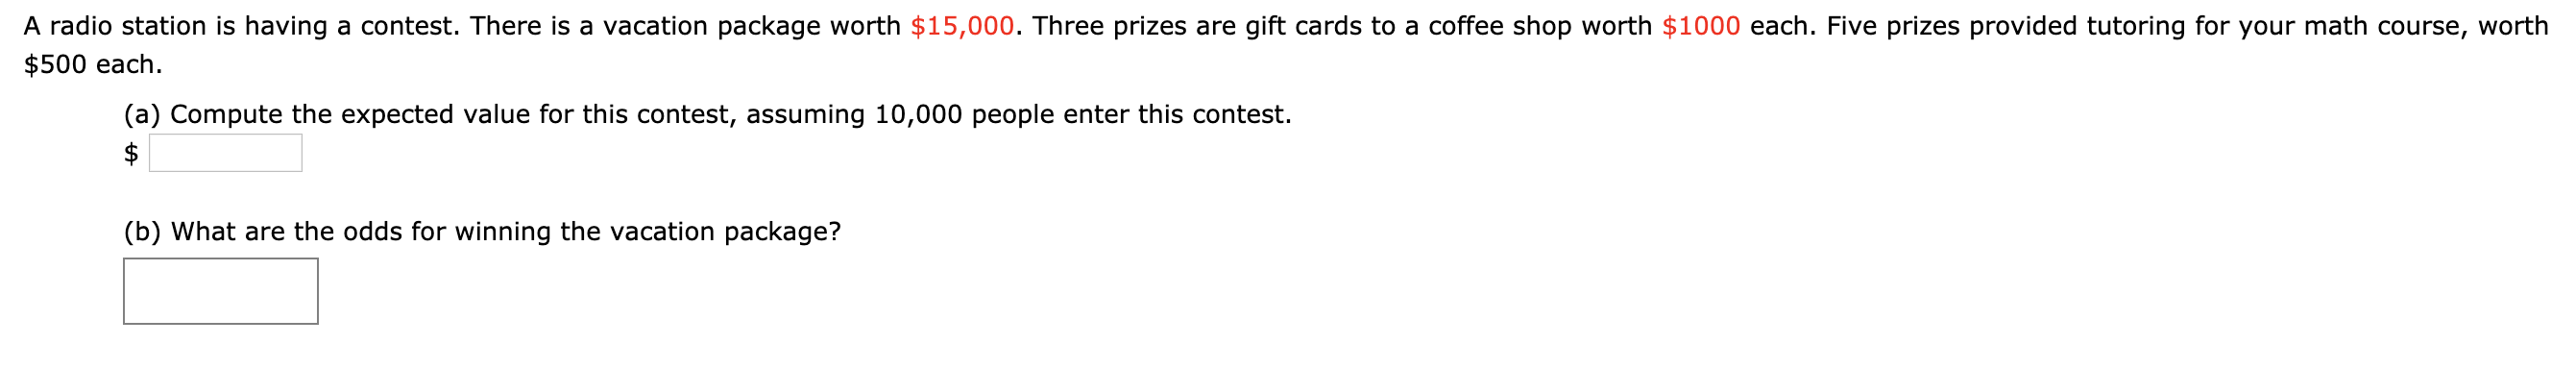 A radio station is having a contest. There is a vacation package worth $15,000. Three prizes are gift cards to a coffee shop worth $1000 each. Five prizes provided tutoring for your math course, worth
$500 each.
(a) Compute the expected value for this contest, assuming 10,000 people enter this contest.
(b) What are the odds for winning the vacation package?
